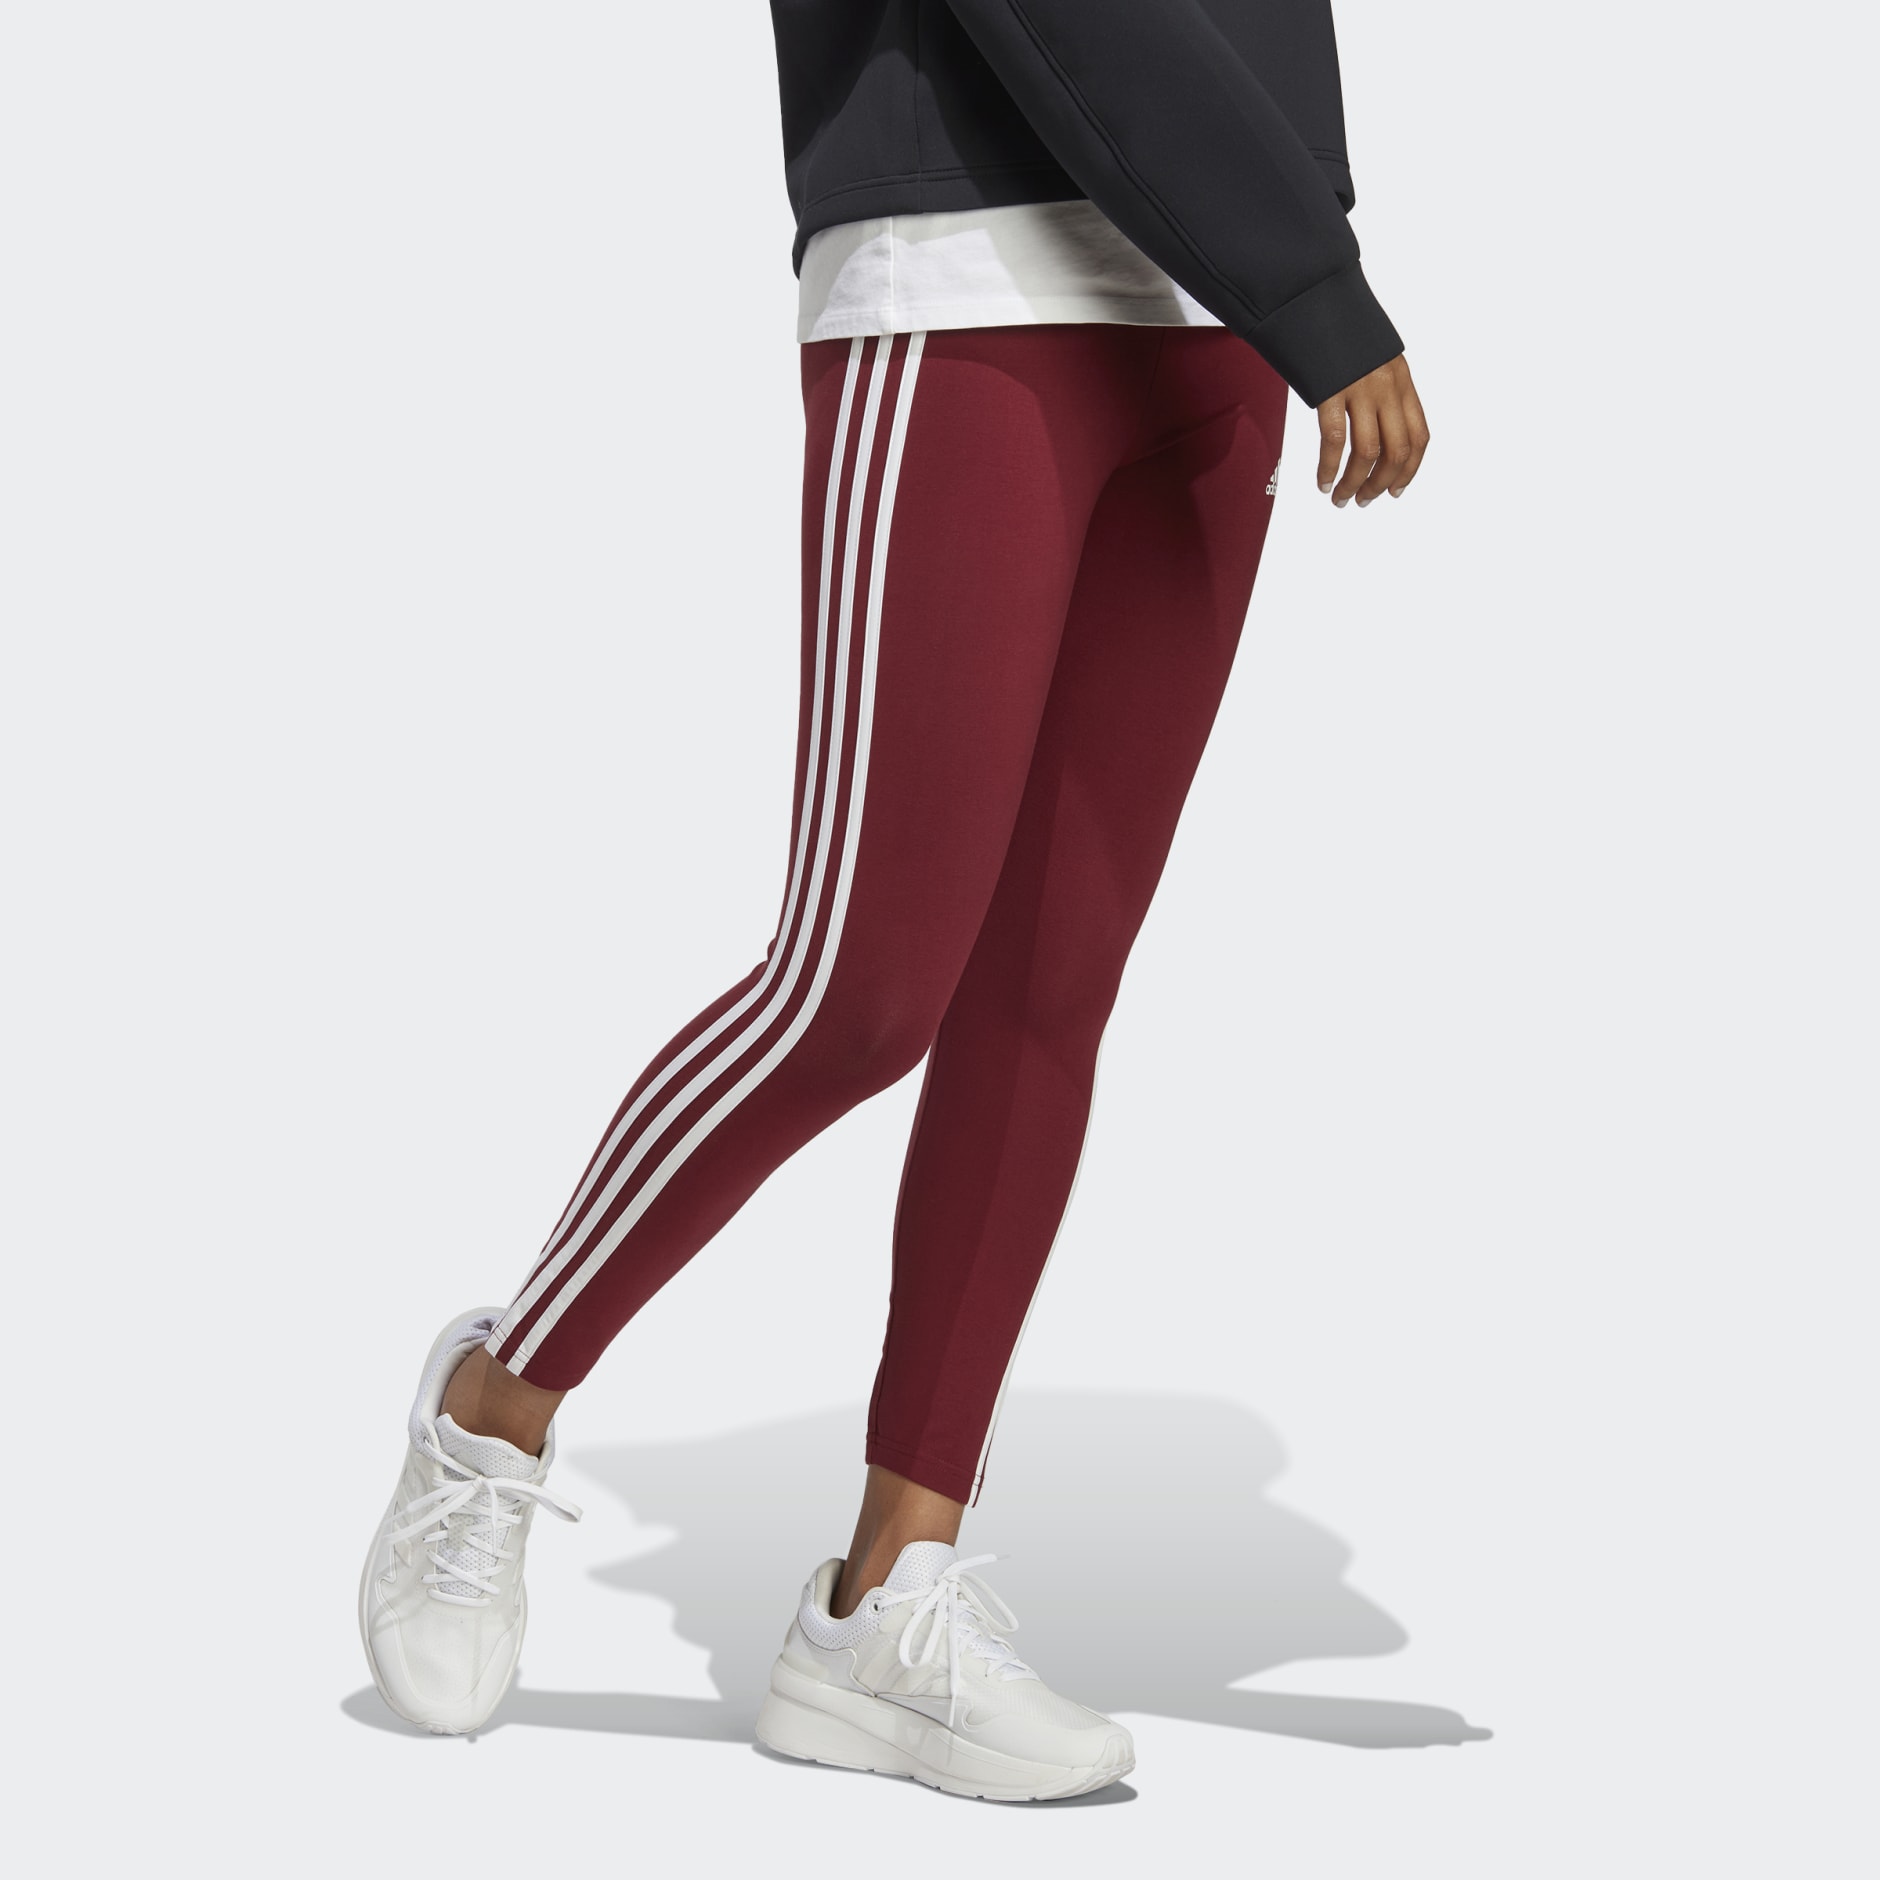 Women's Clothing - Essentials 3-Stripes High-Waisted Single Jersey